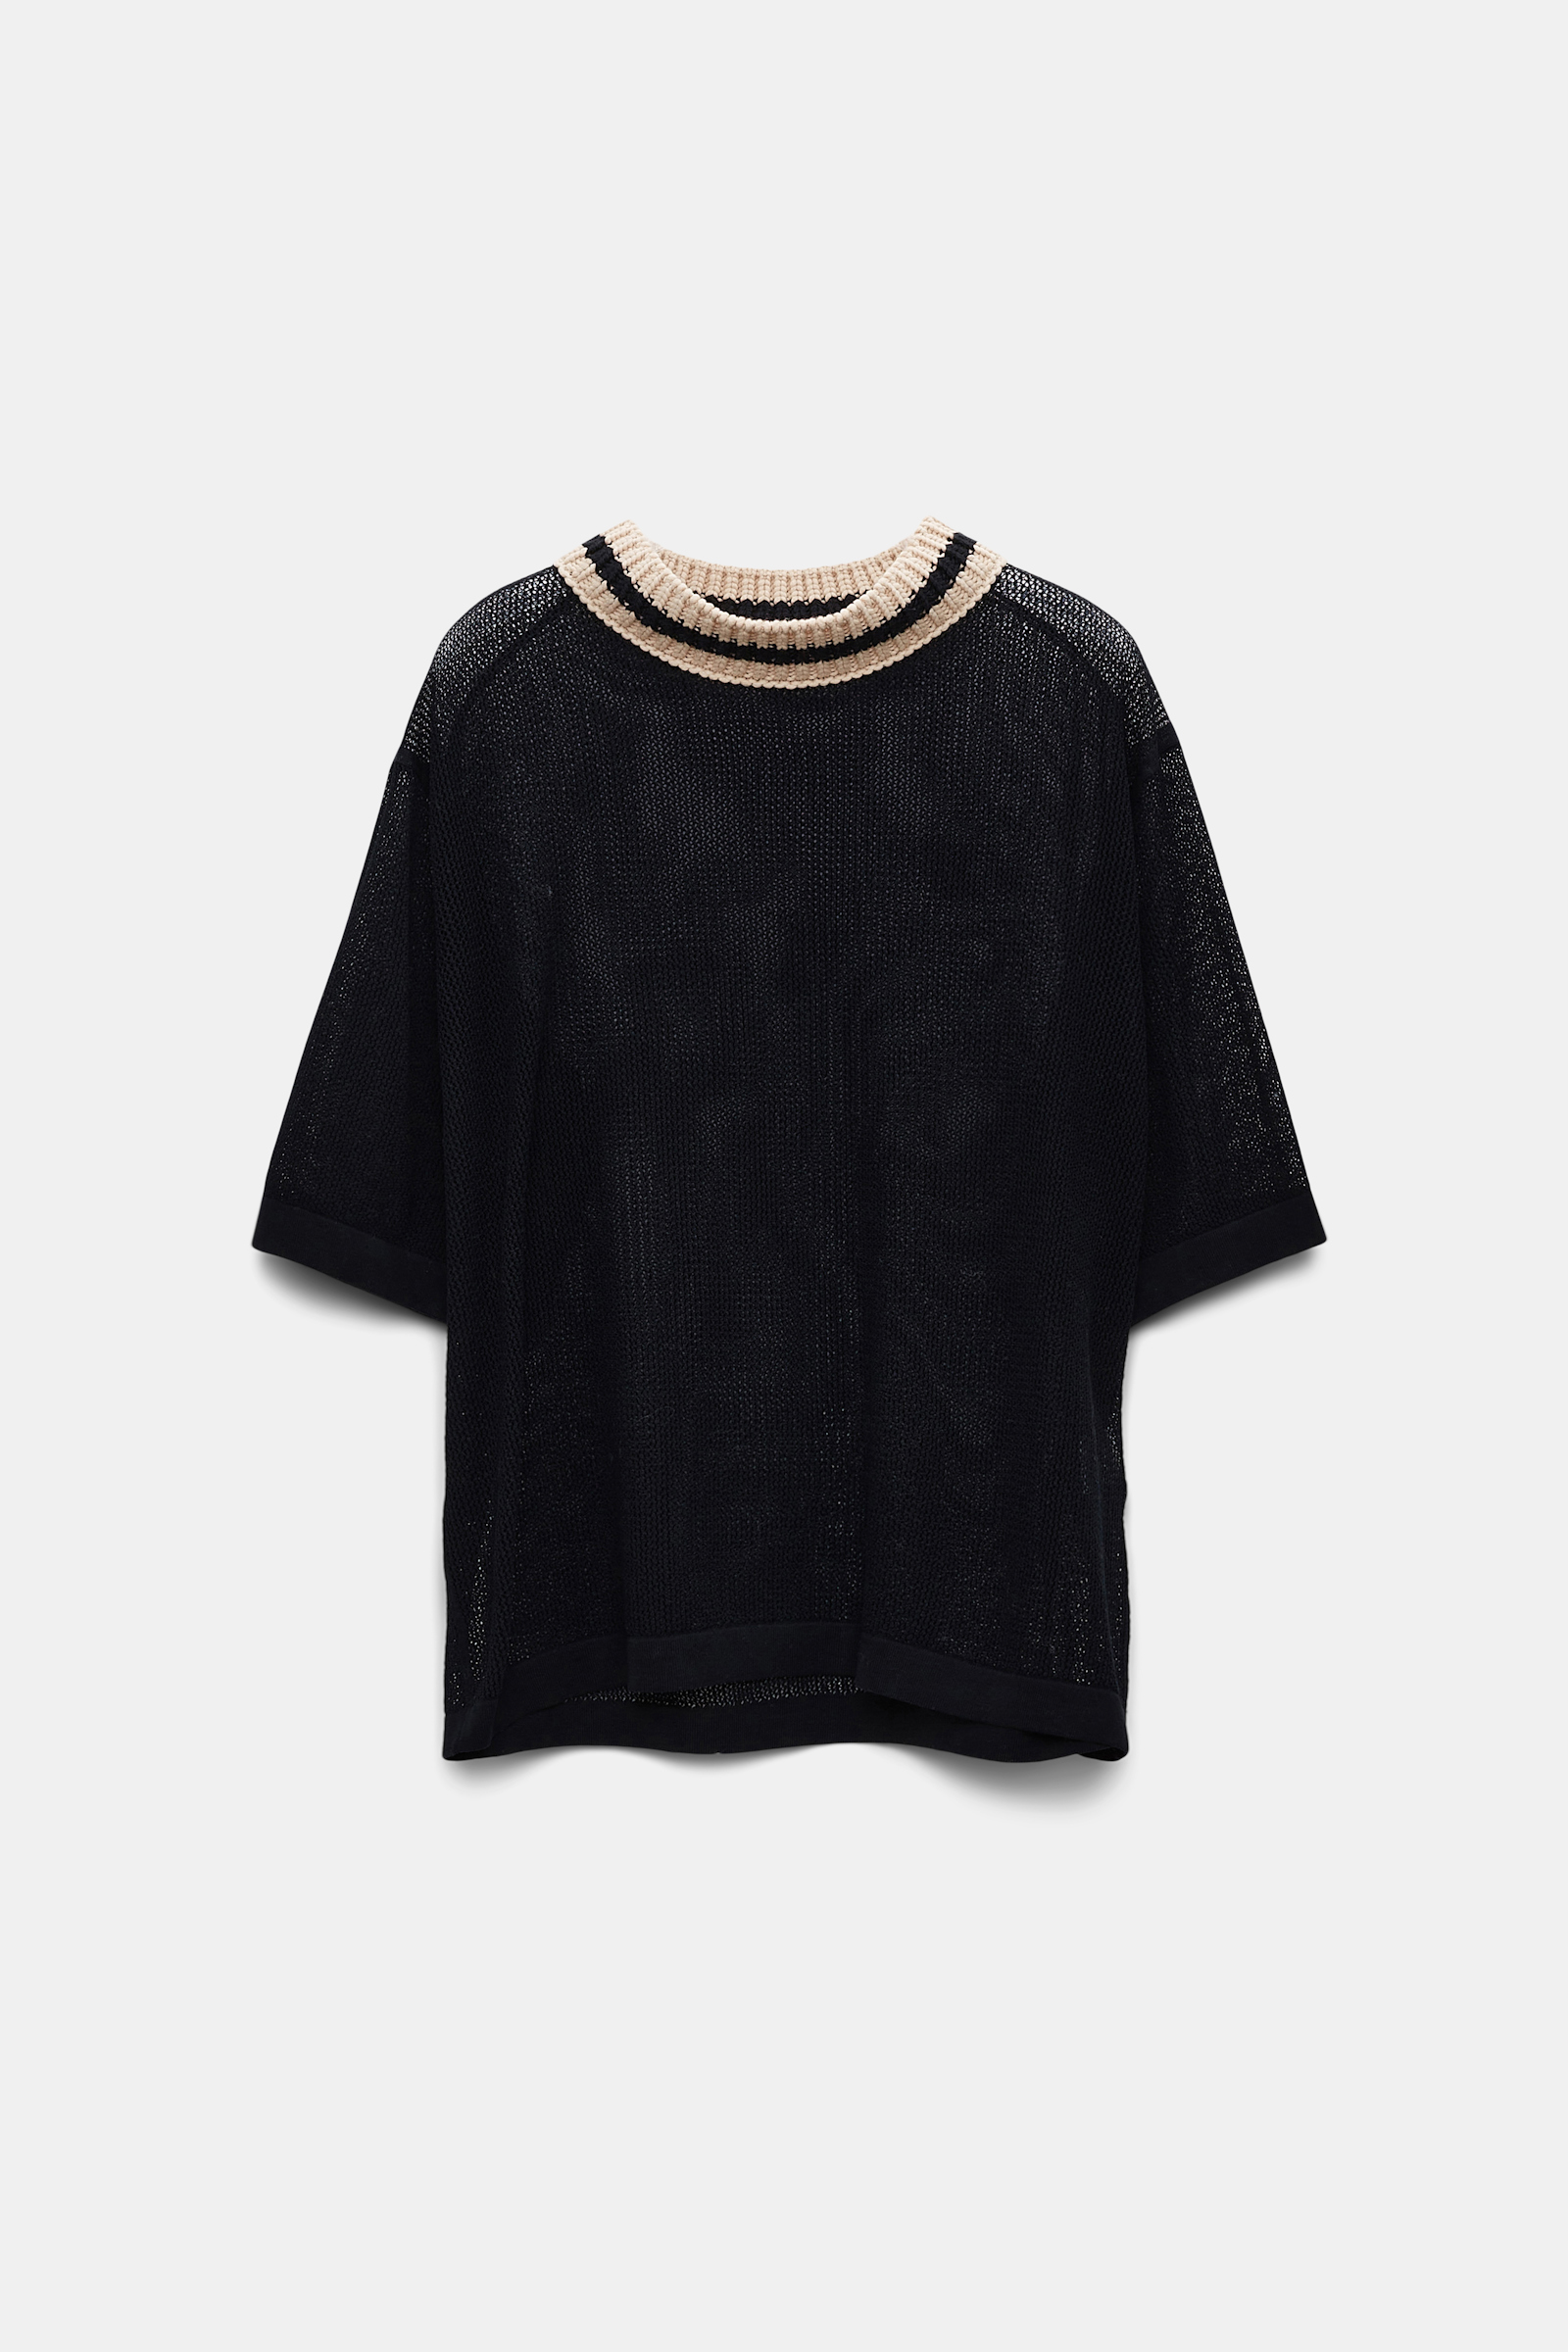 Dorothee Schumacher Sheer knit cotton mesh top with contrast trim pure black